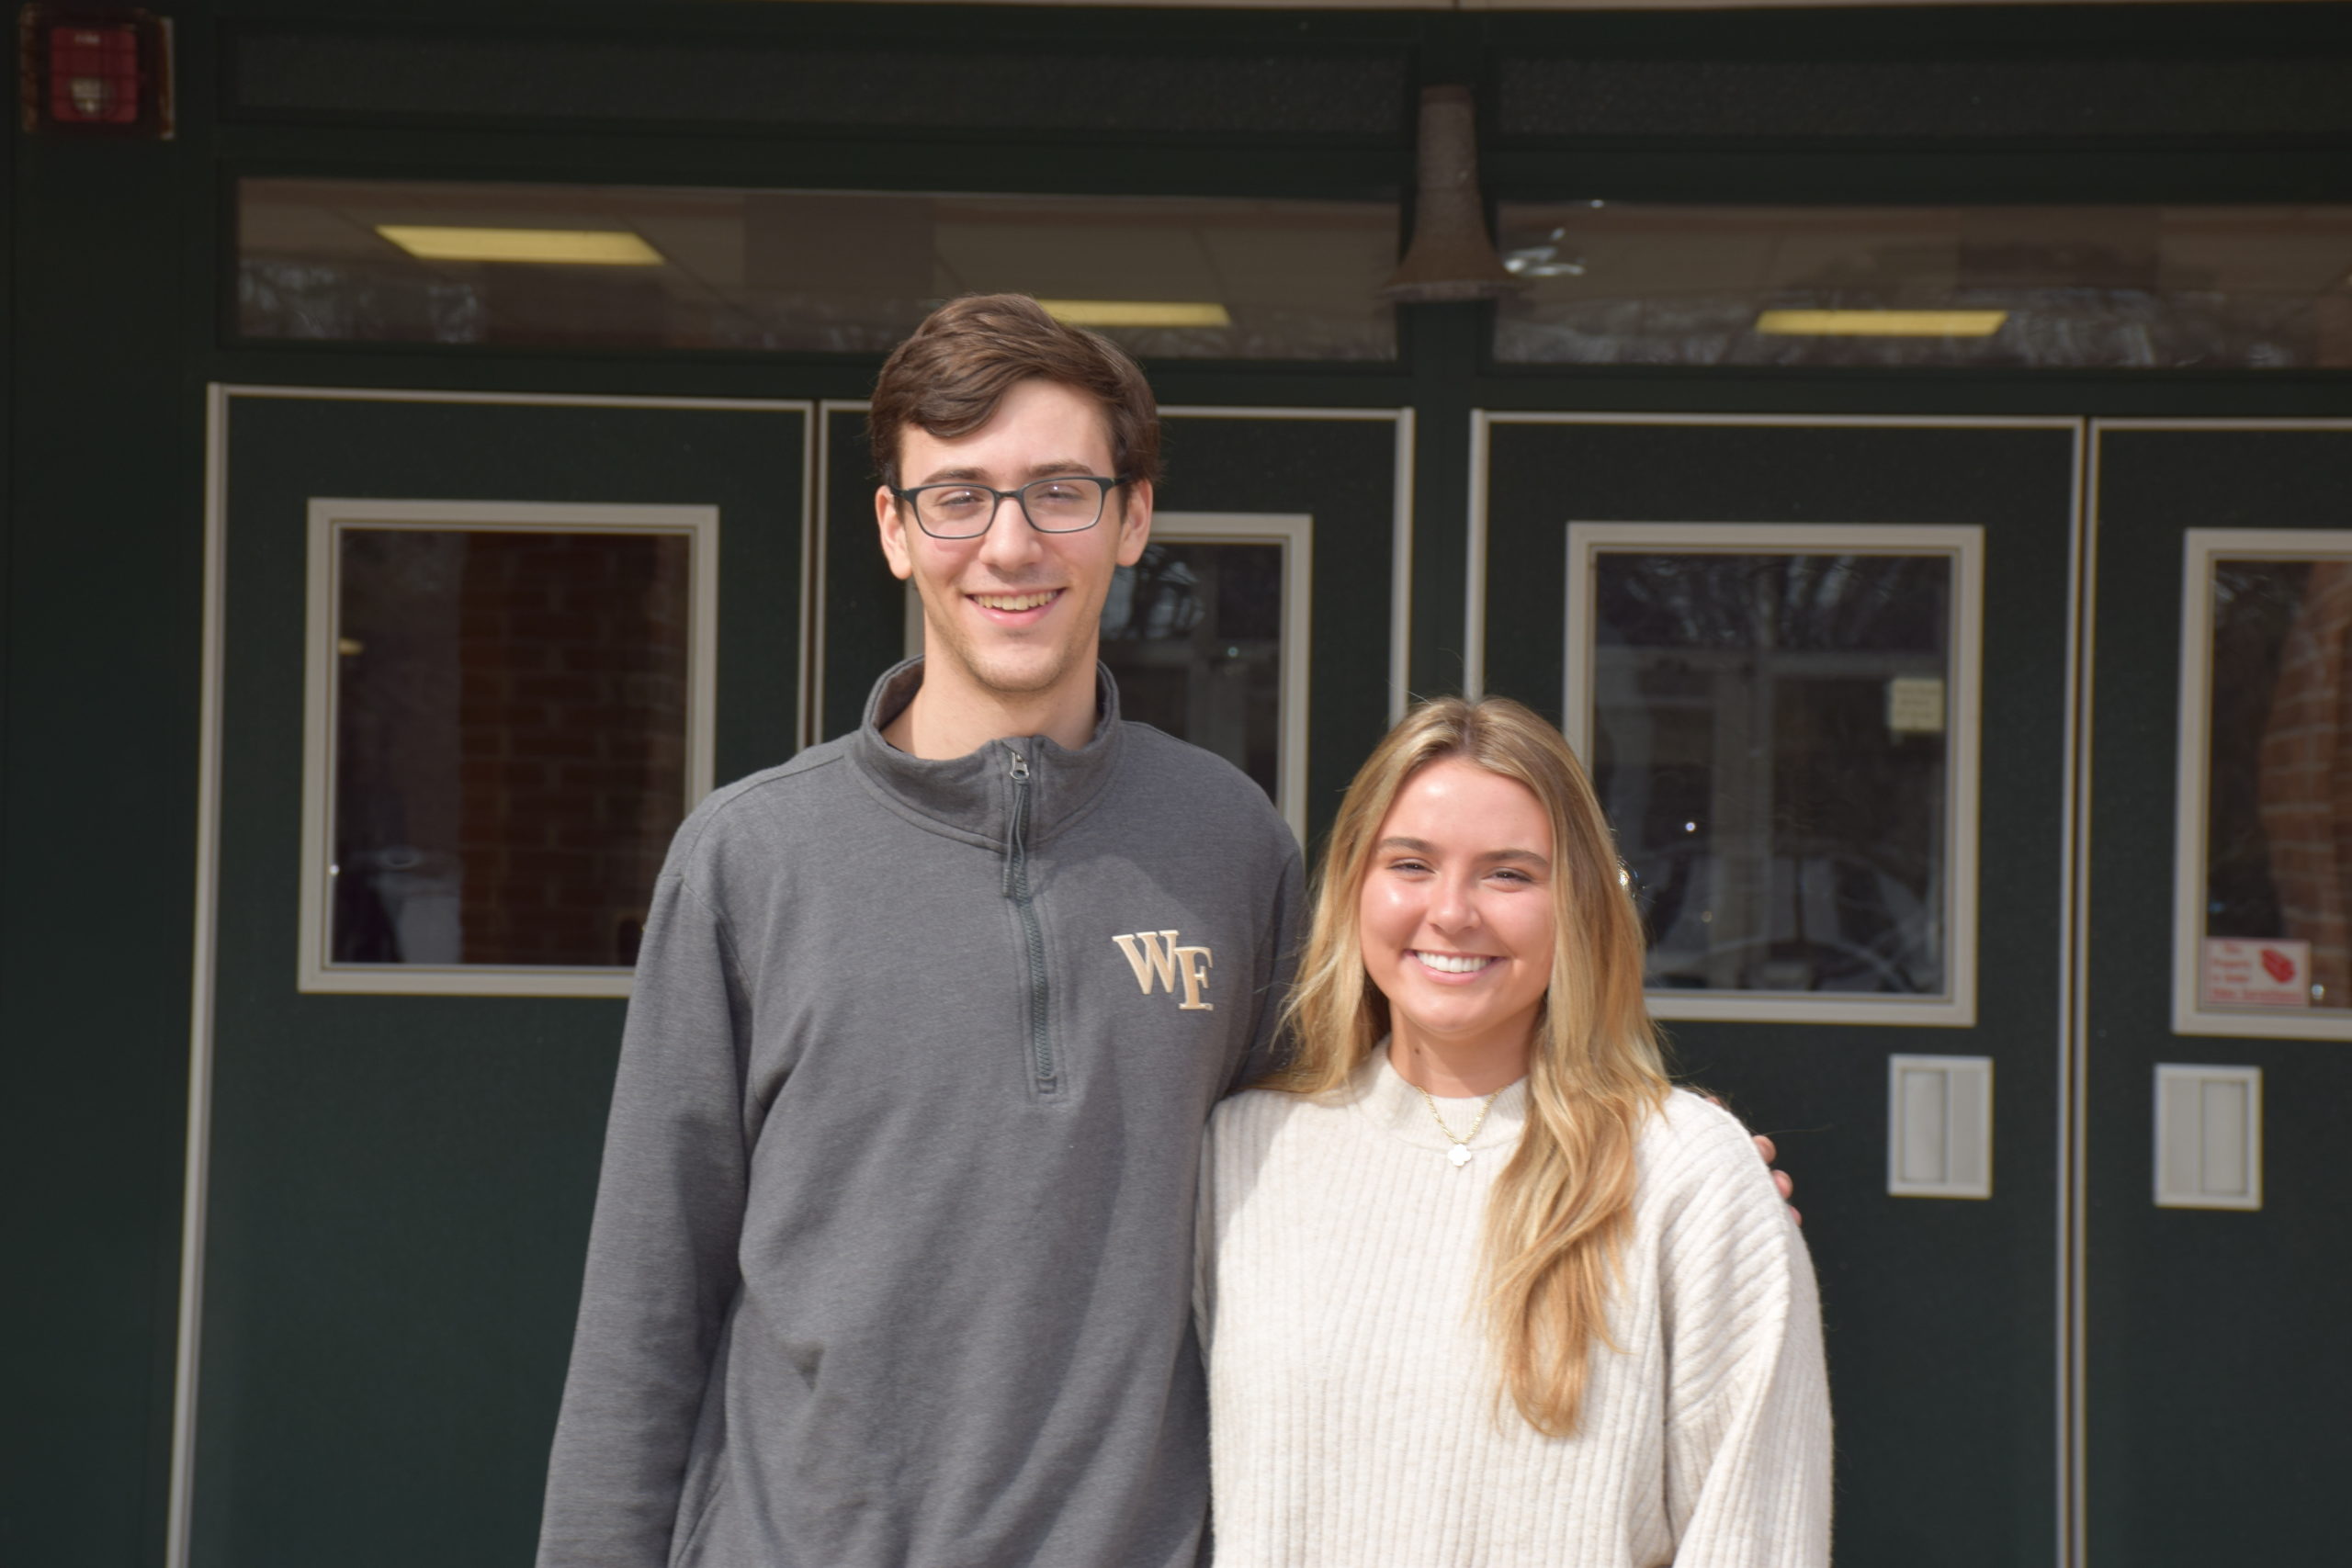 Westhampton Beach High School has named Gavin Ehlers and Madison Quinn as its Class of 2022 valedictorian and salutatorian.